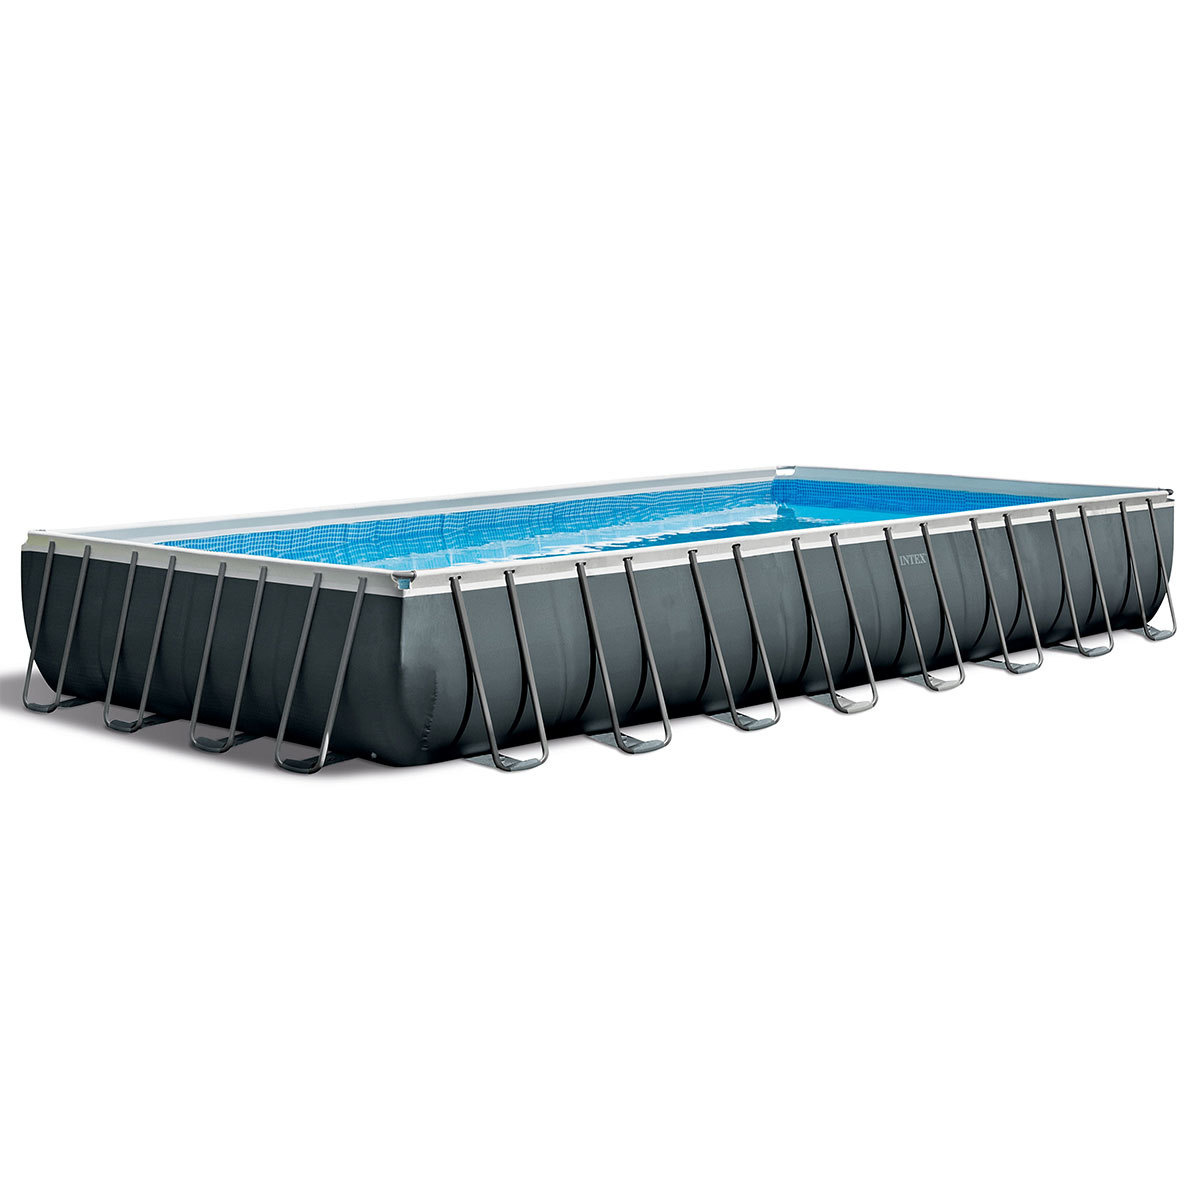 Intex 32ft (9.8m) x 16ft (4.9m) Ultra XTR Rectangular Frame Pool with Sand Filter Pump, Saltwater System and Accessories